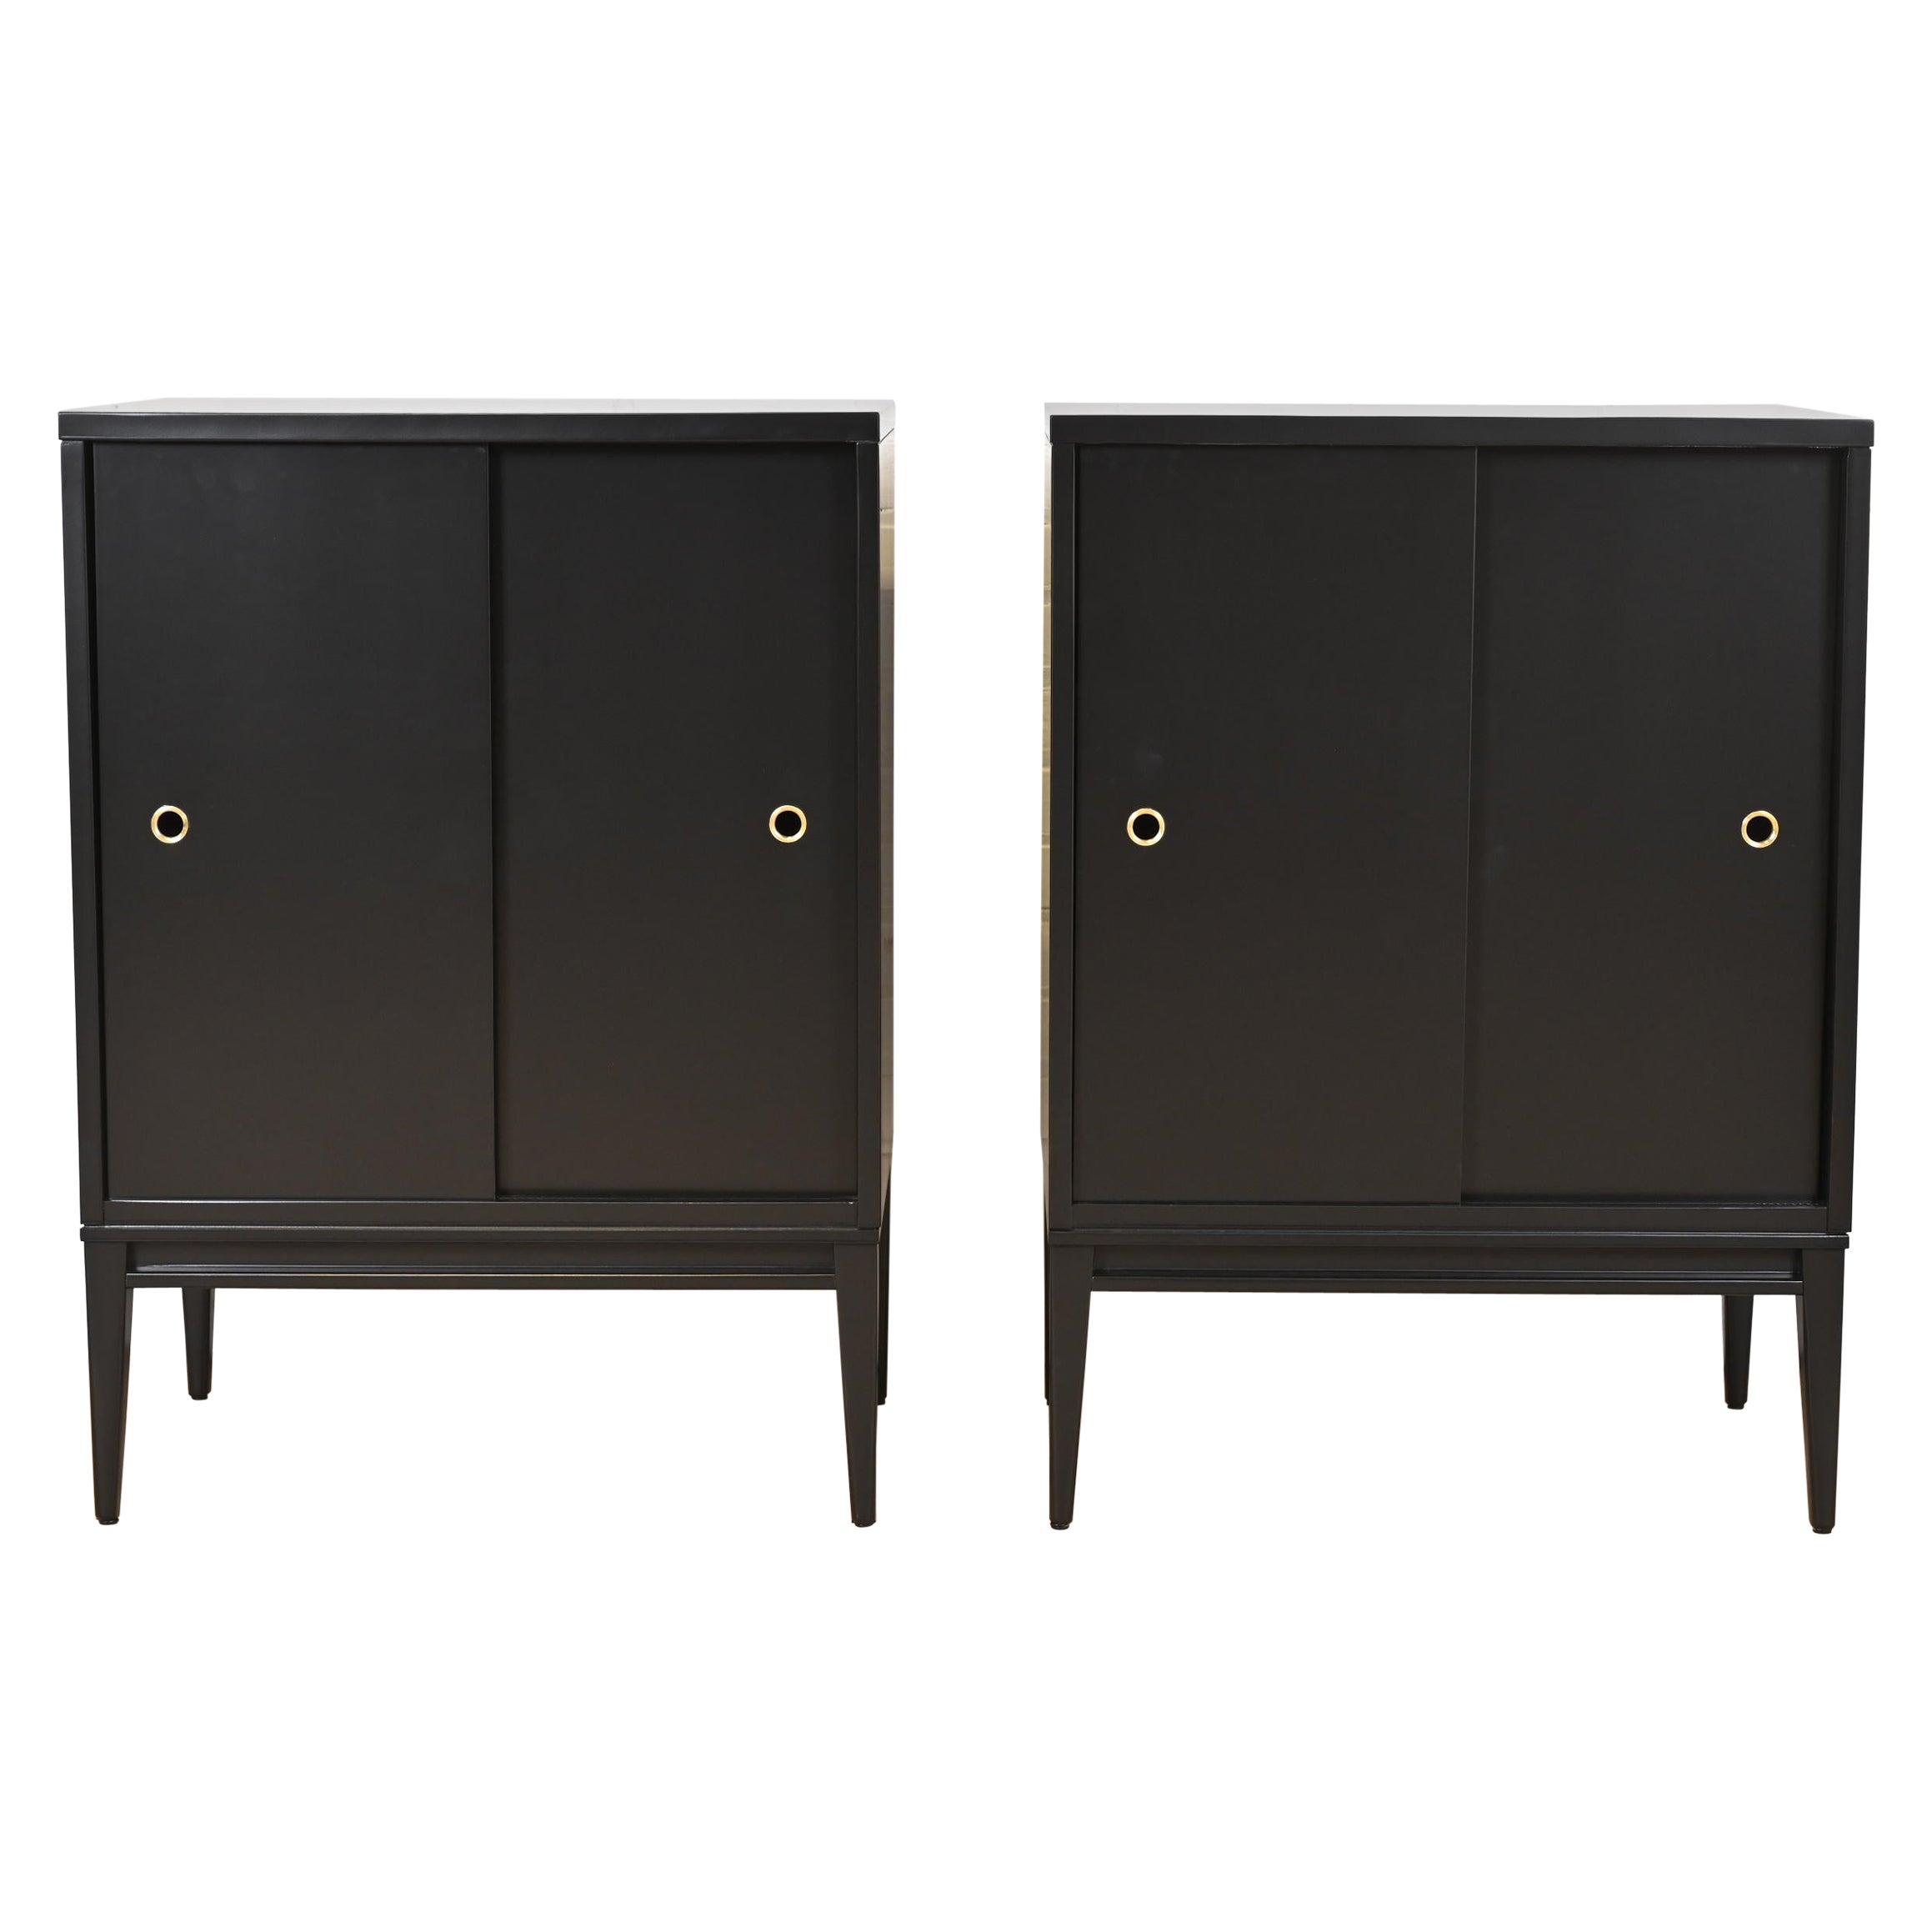 Paul McCobb Planner Group Black Lacquered Cabinets With Sliding Doors, Pair